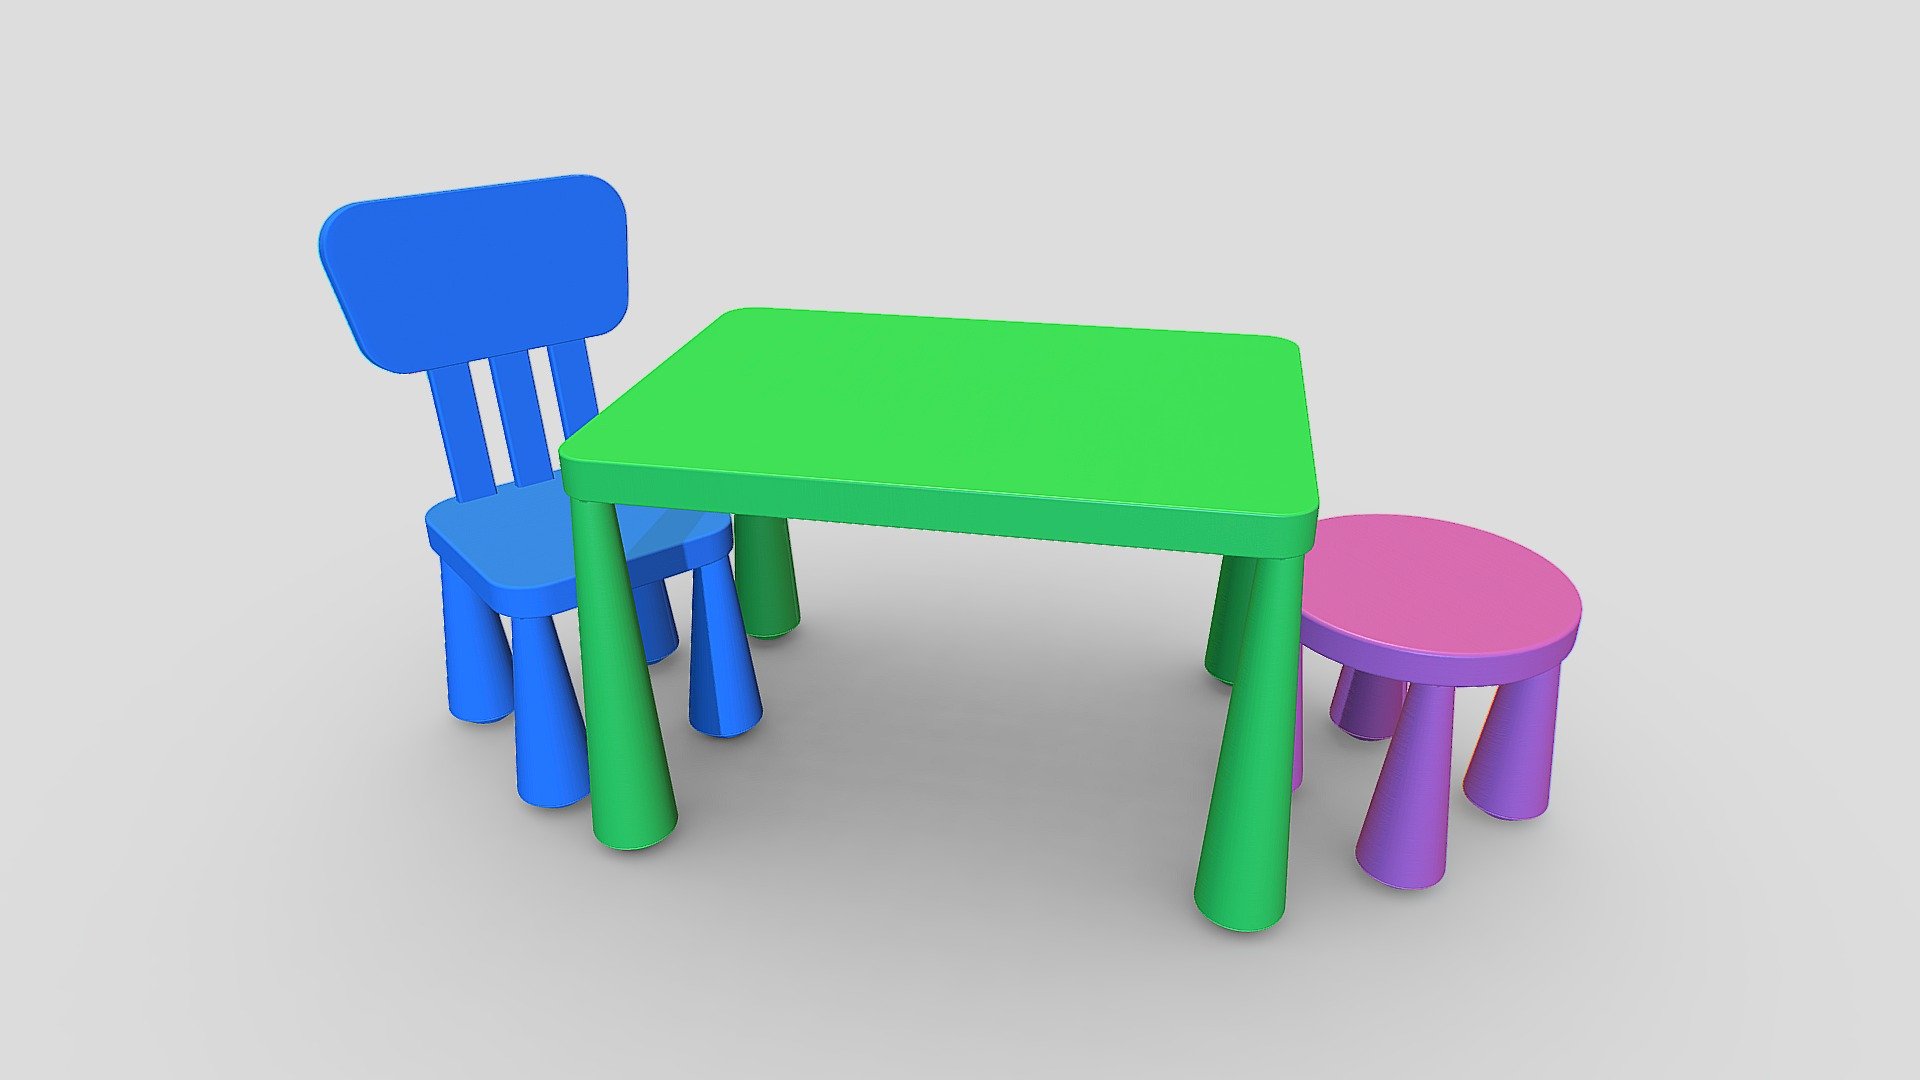 High Quality Chairs and Table, modern minimalist design. like Ikea models.

Ideal for use in Arch Viz projects.

Also includes dynamic PBR material and textures 3d model